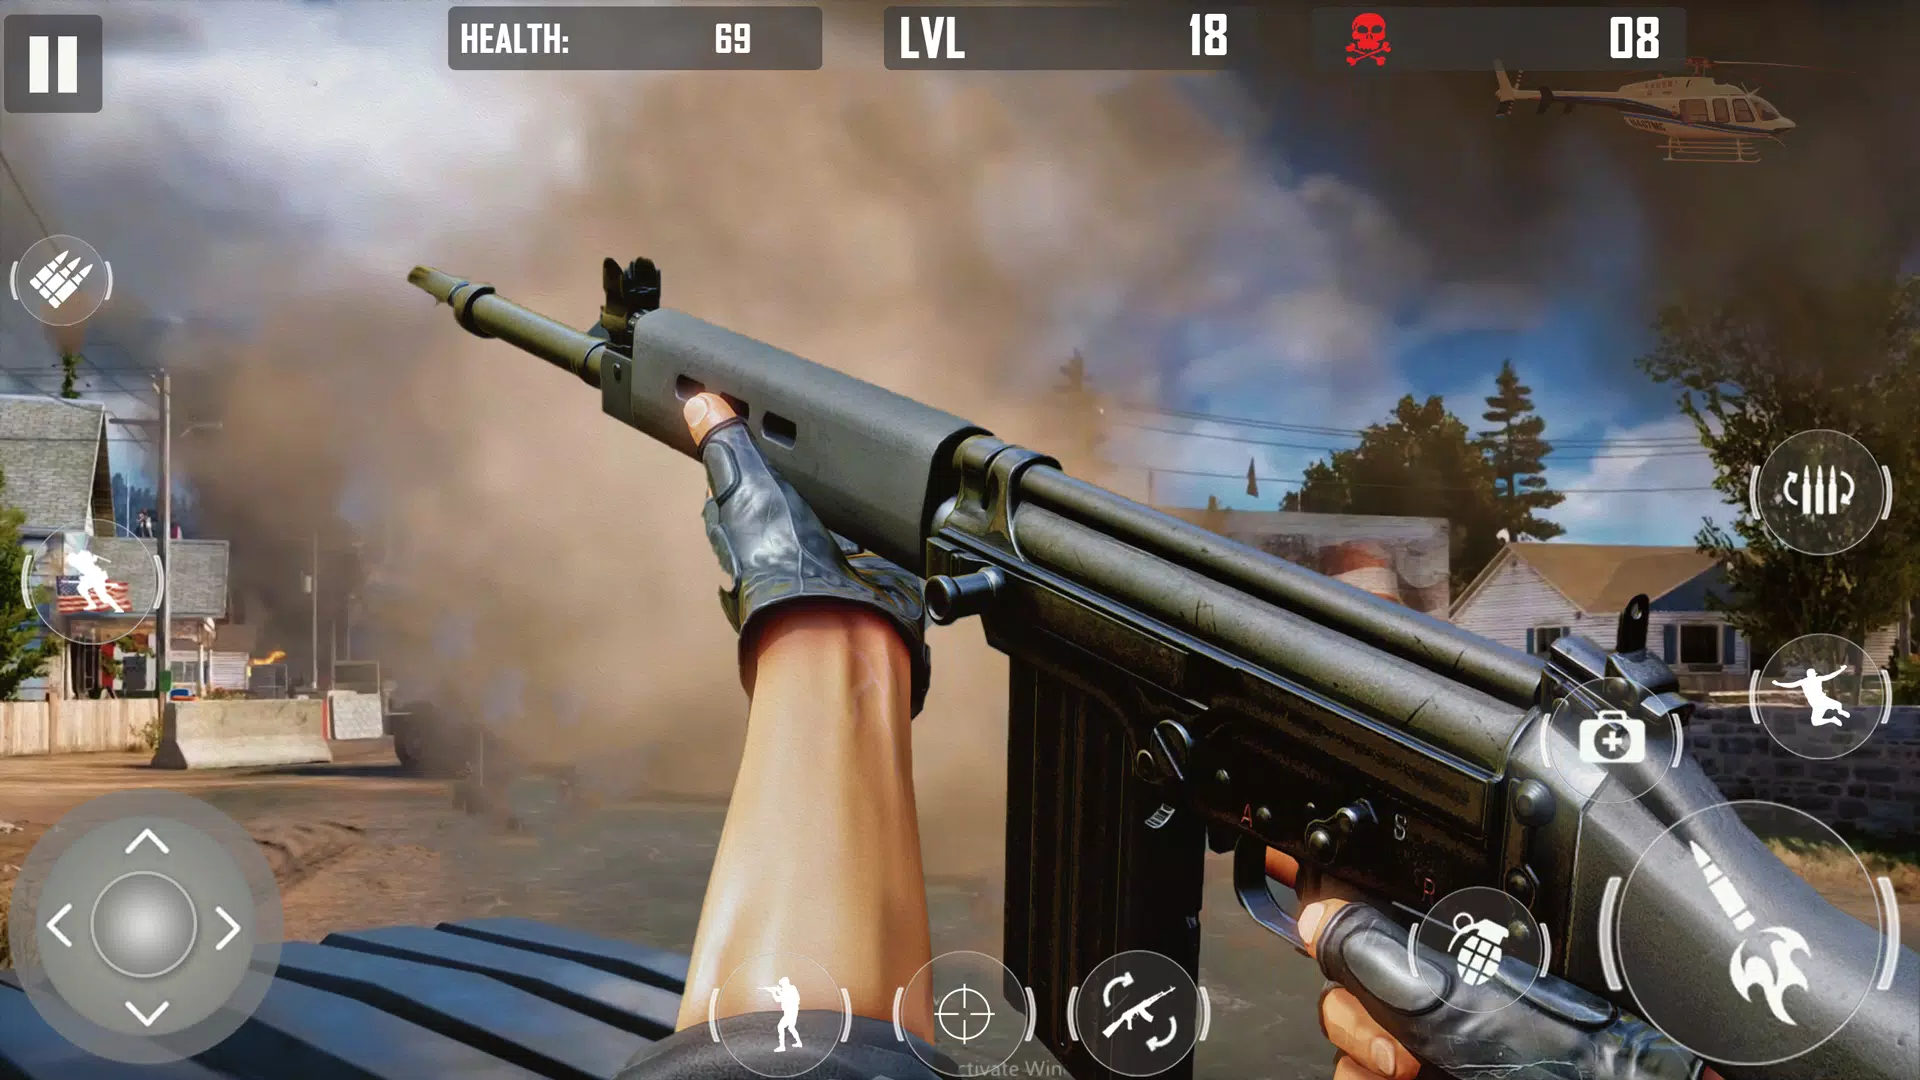 Cover Fire: Offline Shooting - Apps on Google Play